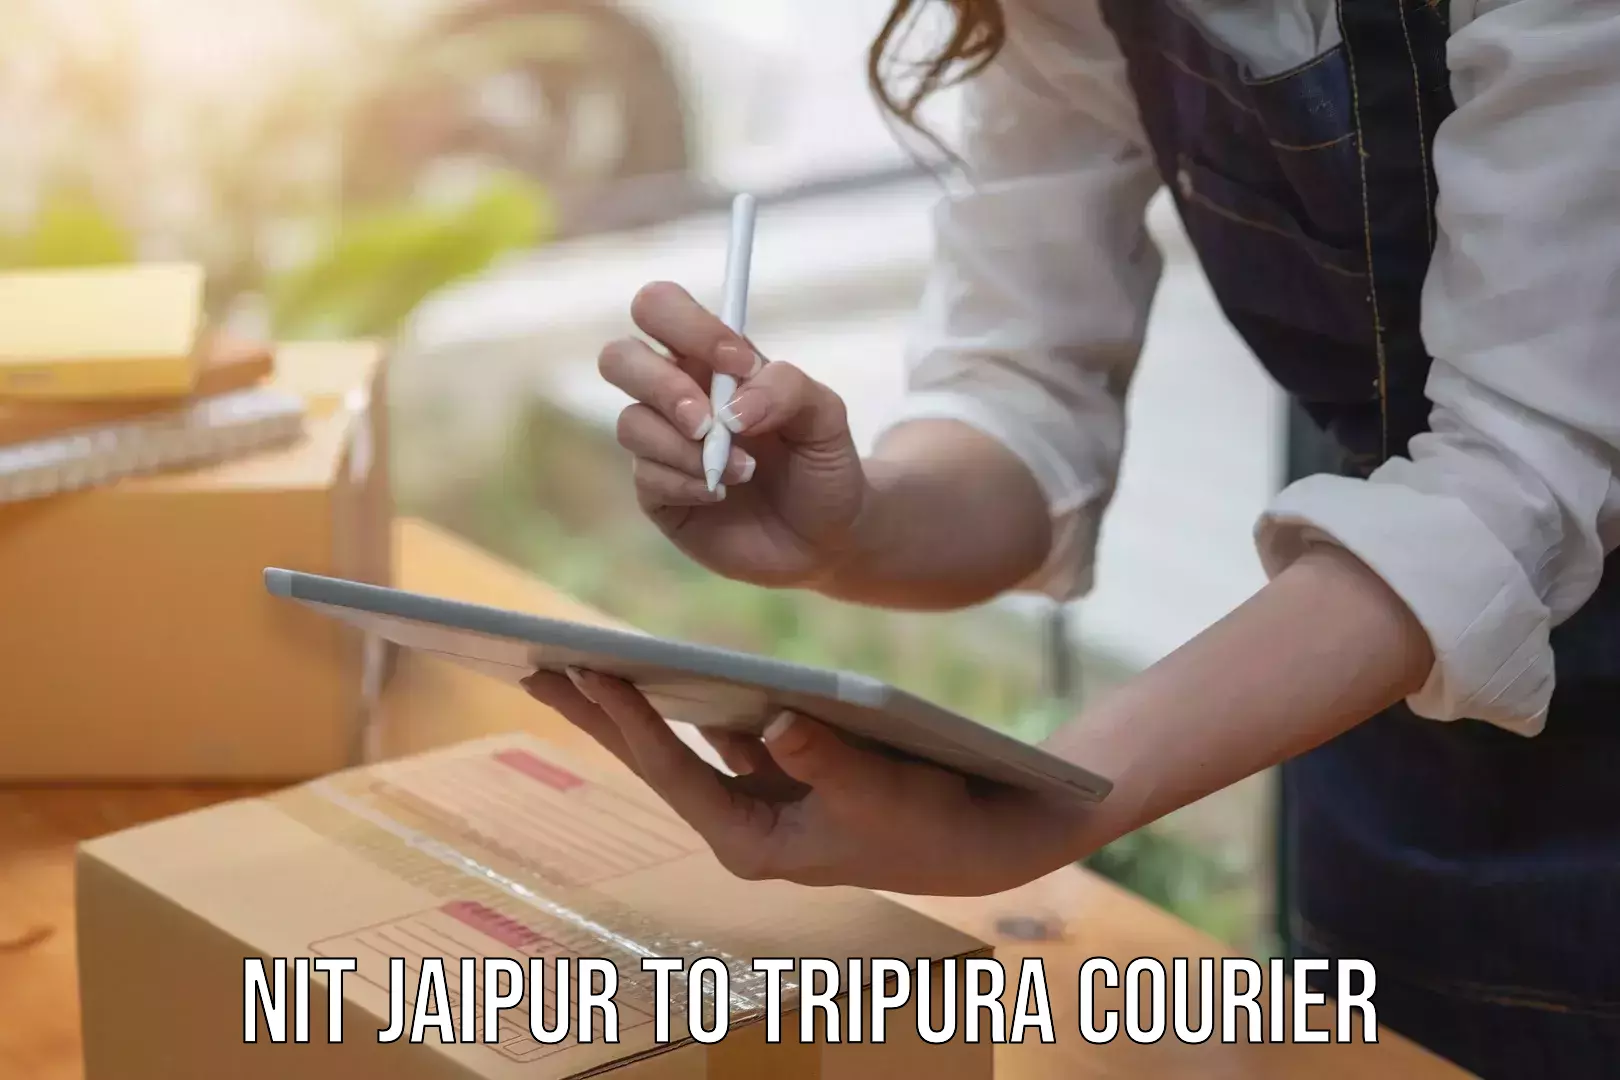 Fast shipping solutions NIT Jaipur to Udaipur Tripura